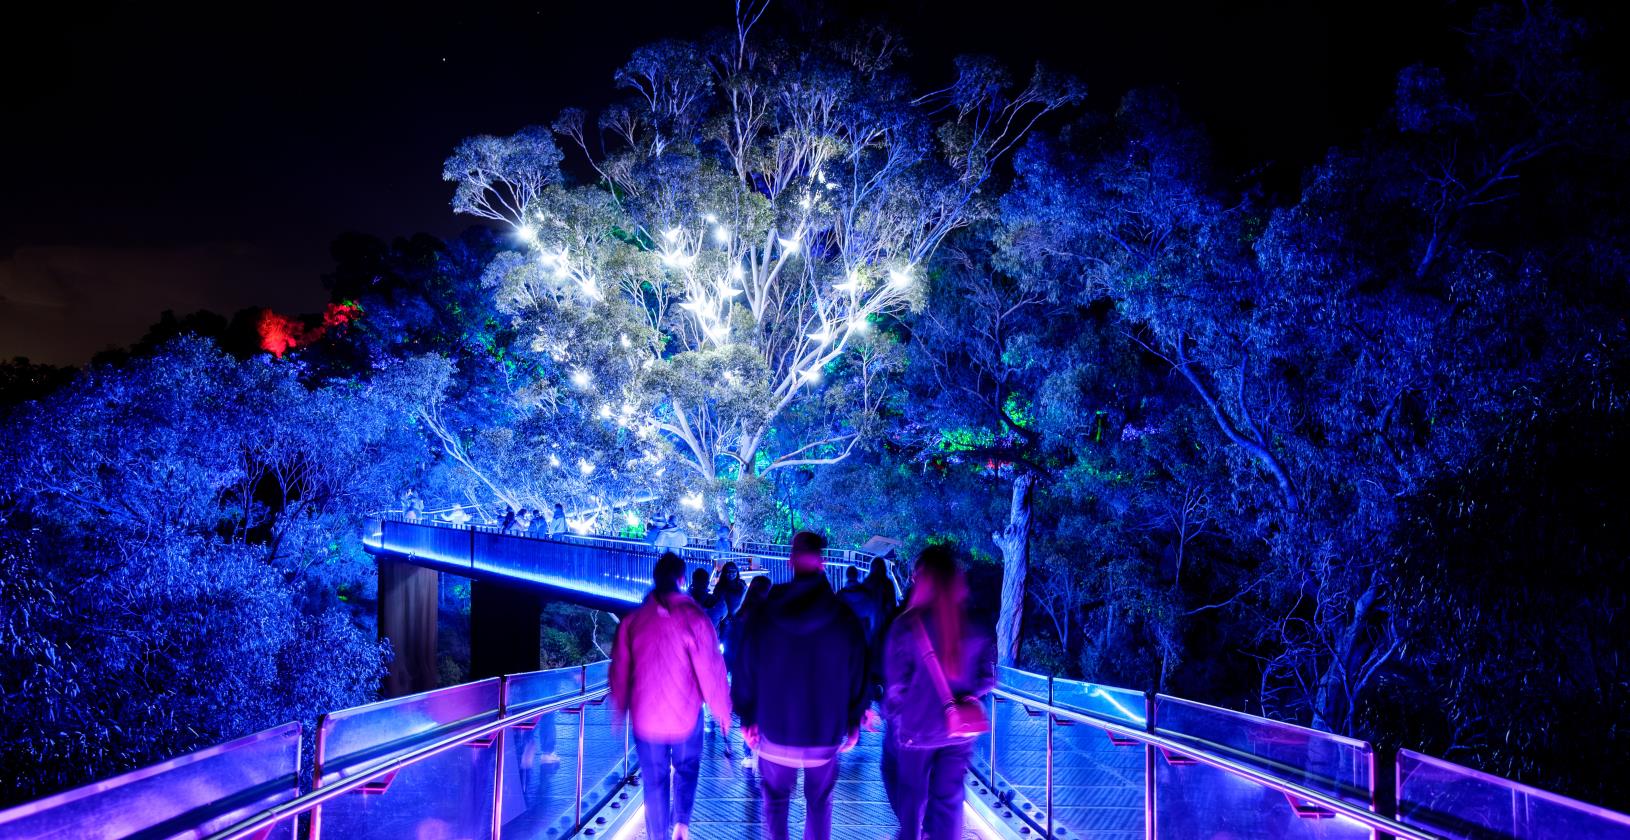 Lightscape - powered by the City of Perth returns this June